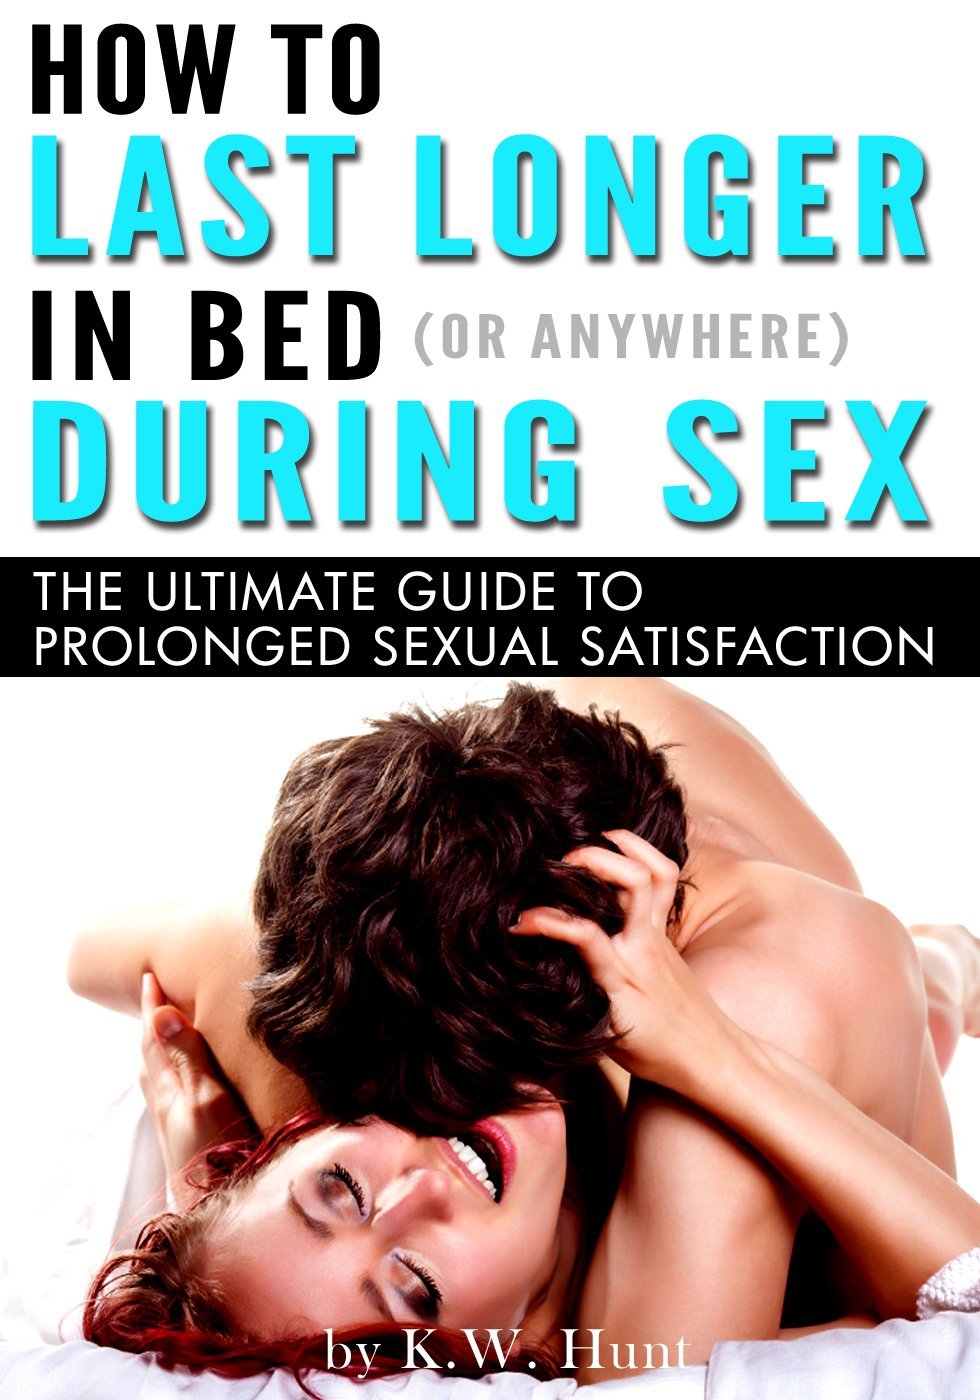 FREE: How to Last Longer in Bed (or Anywhere) During Sex: The Ultimate Guide to Prolonged Sexual Satisfaction by K.W. Hunt